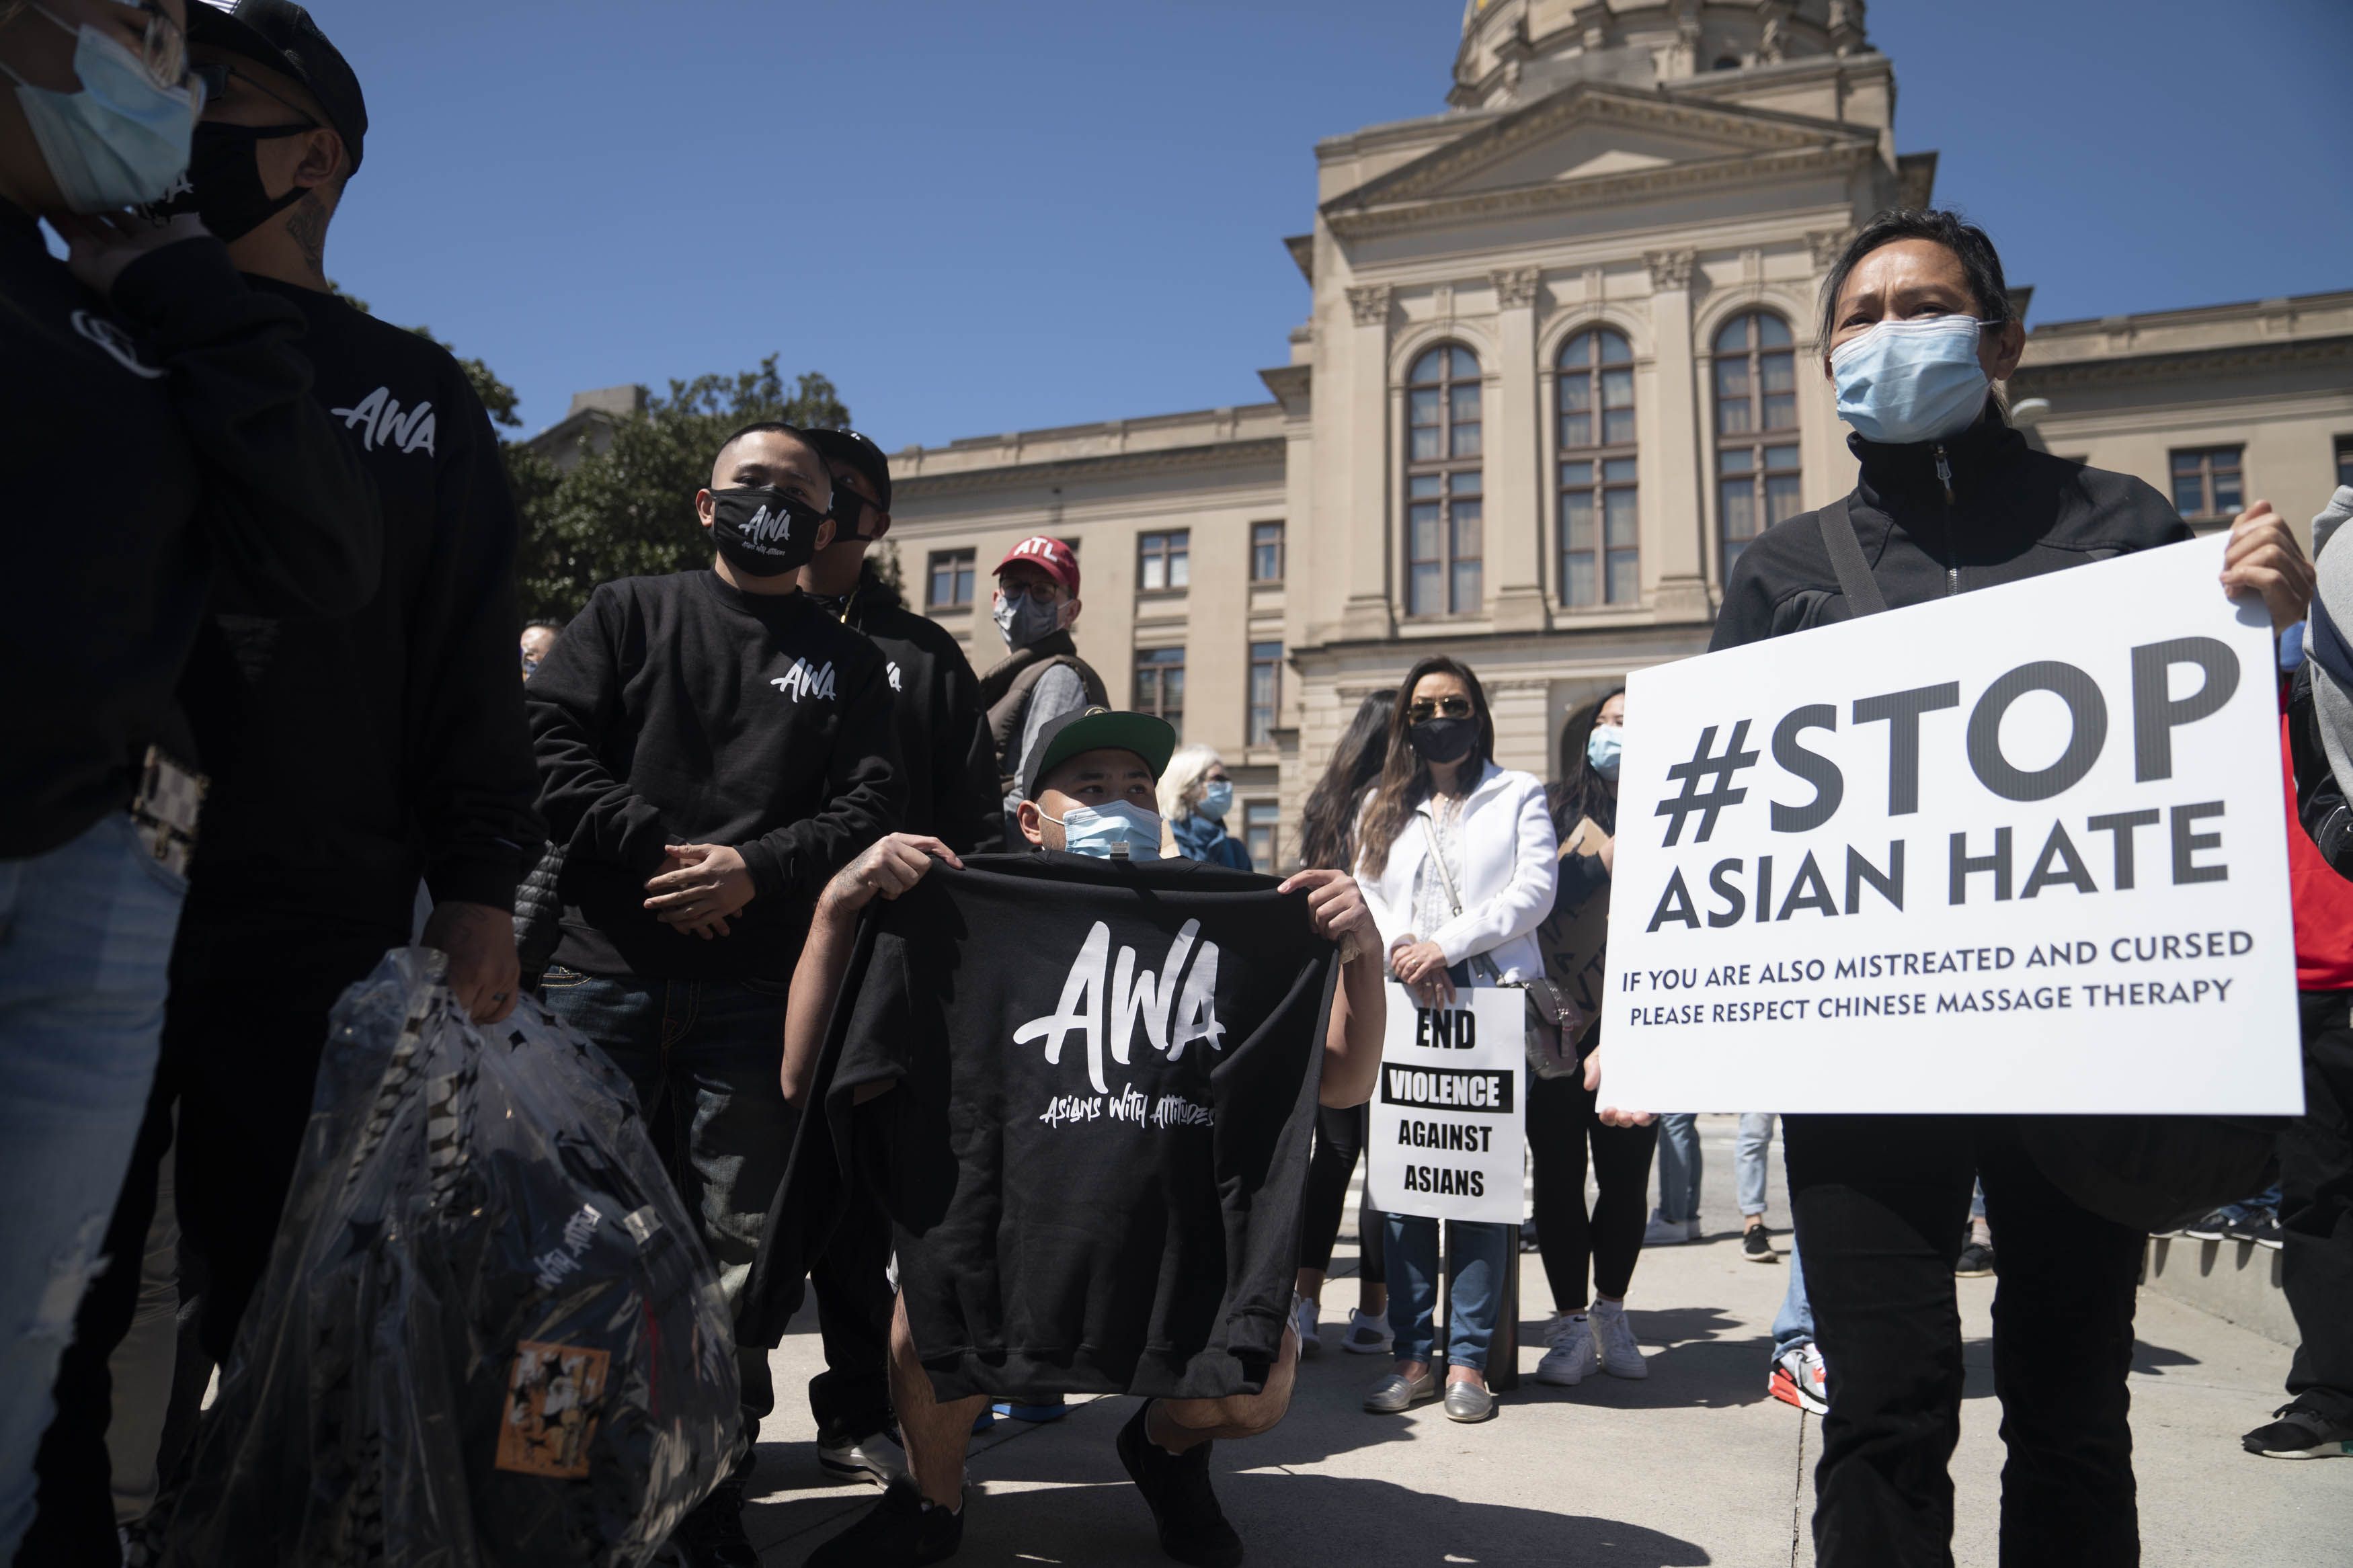 Demonstrators hold signs during a Stop AAPI Hate Rally outside the State Capitol building in Atlanta, Georgia, U.S., on Saturday, March 20